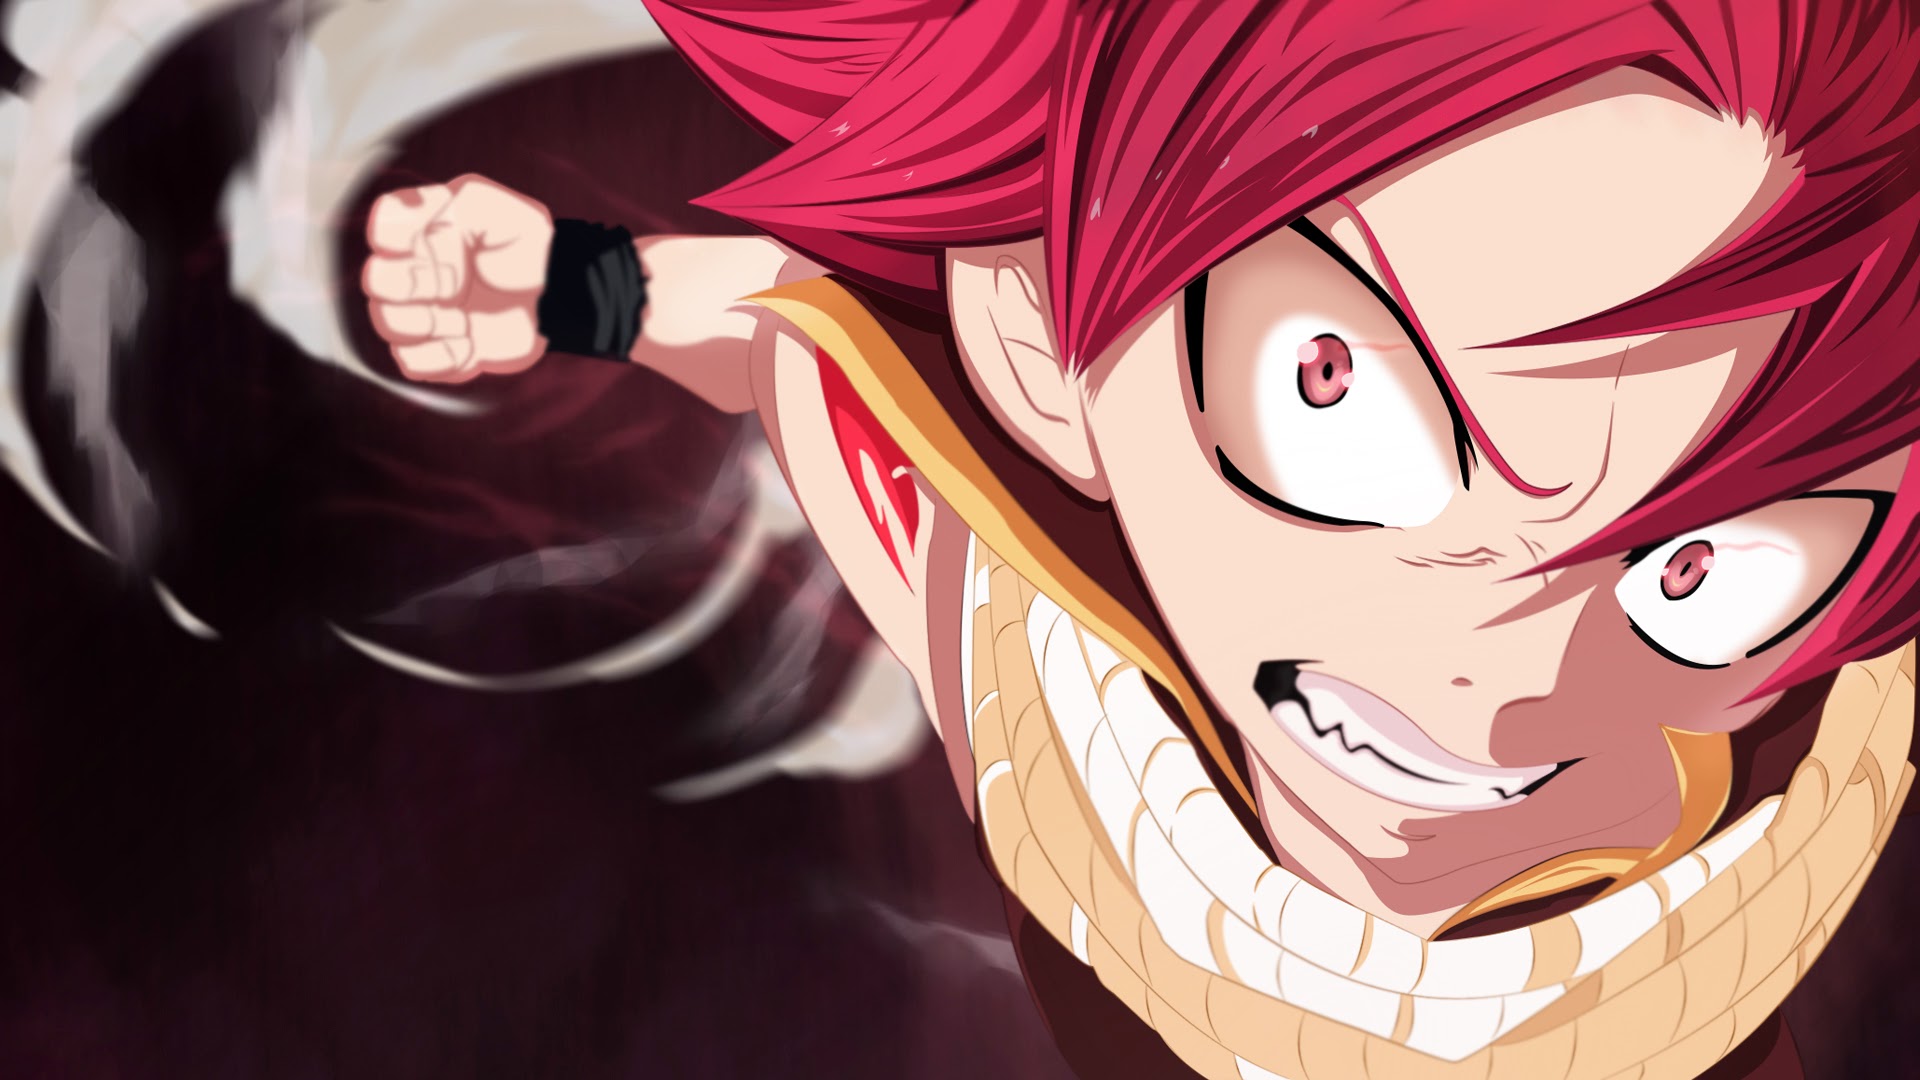 Natsu Dragneel Anime Fairy Tail HD Wallpaper Image Picture